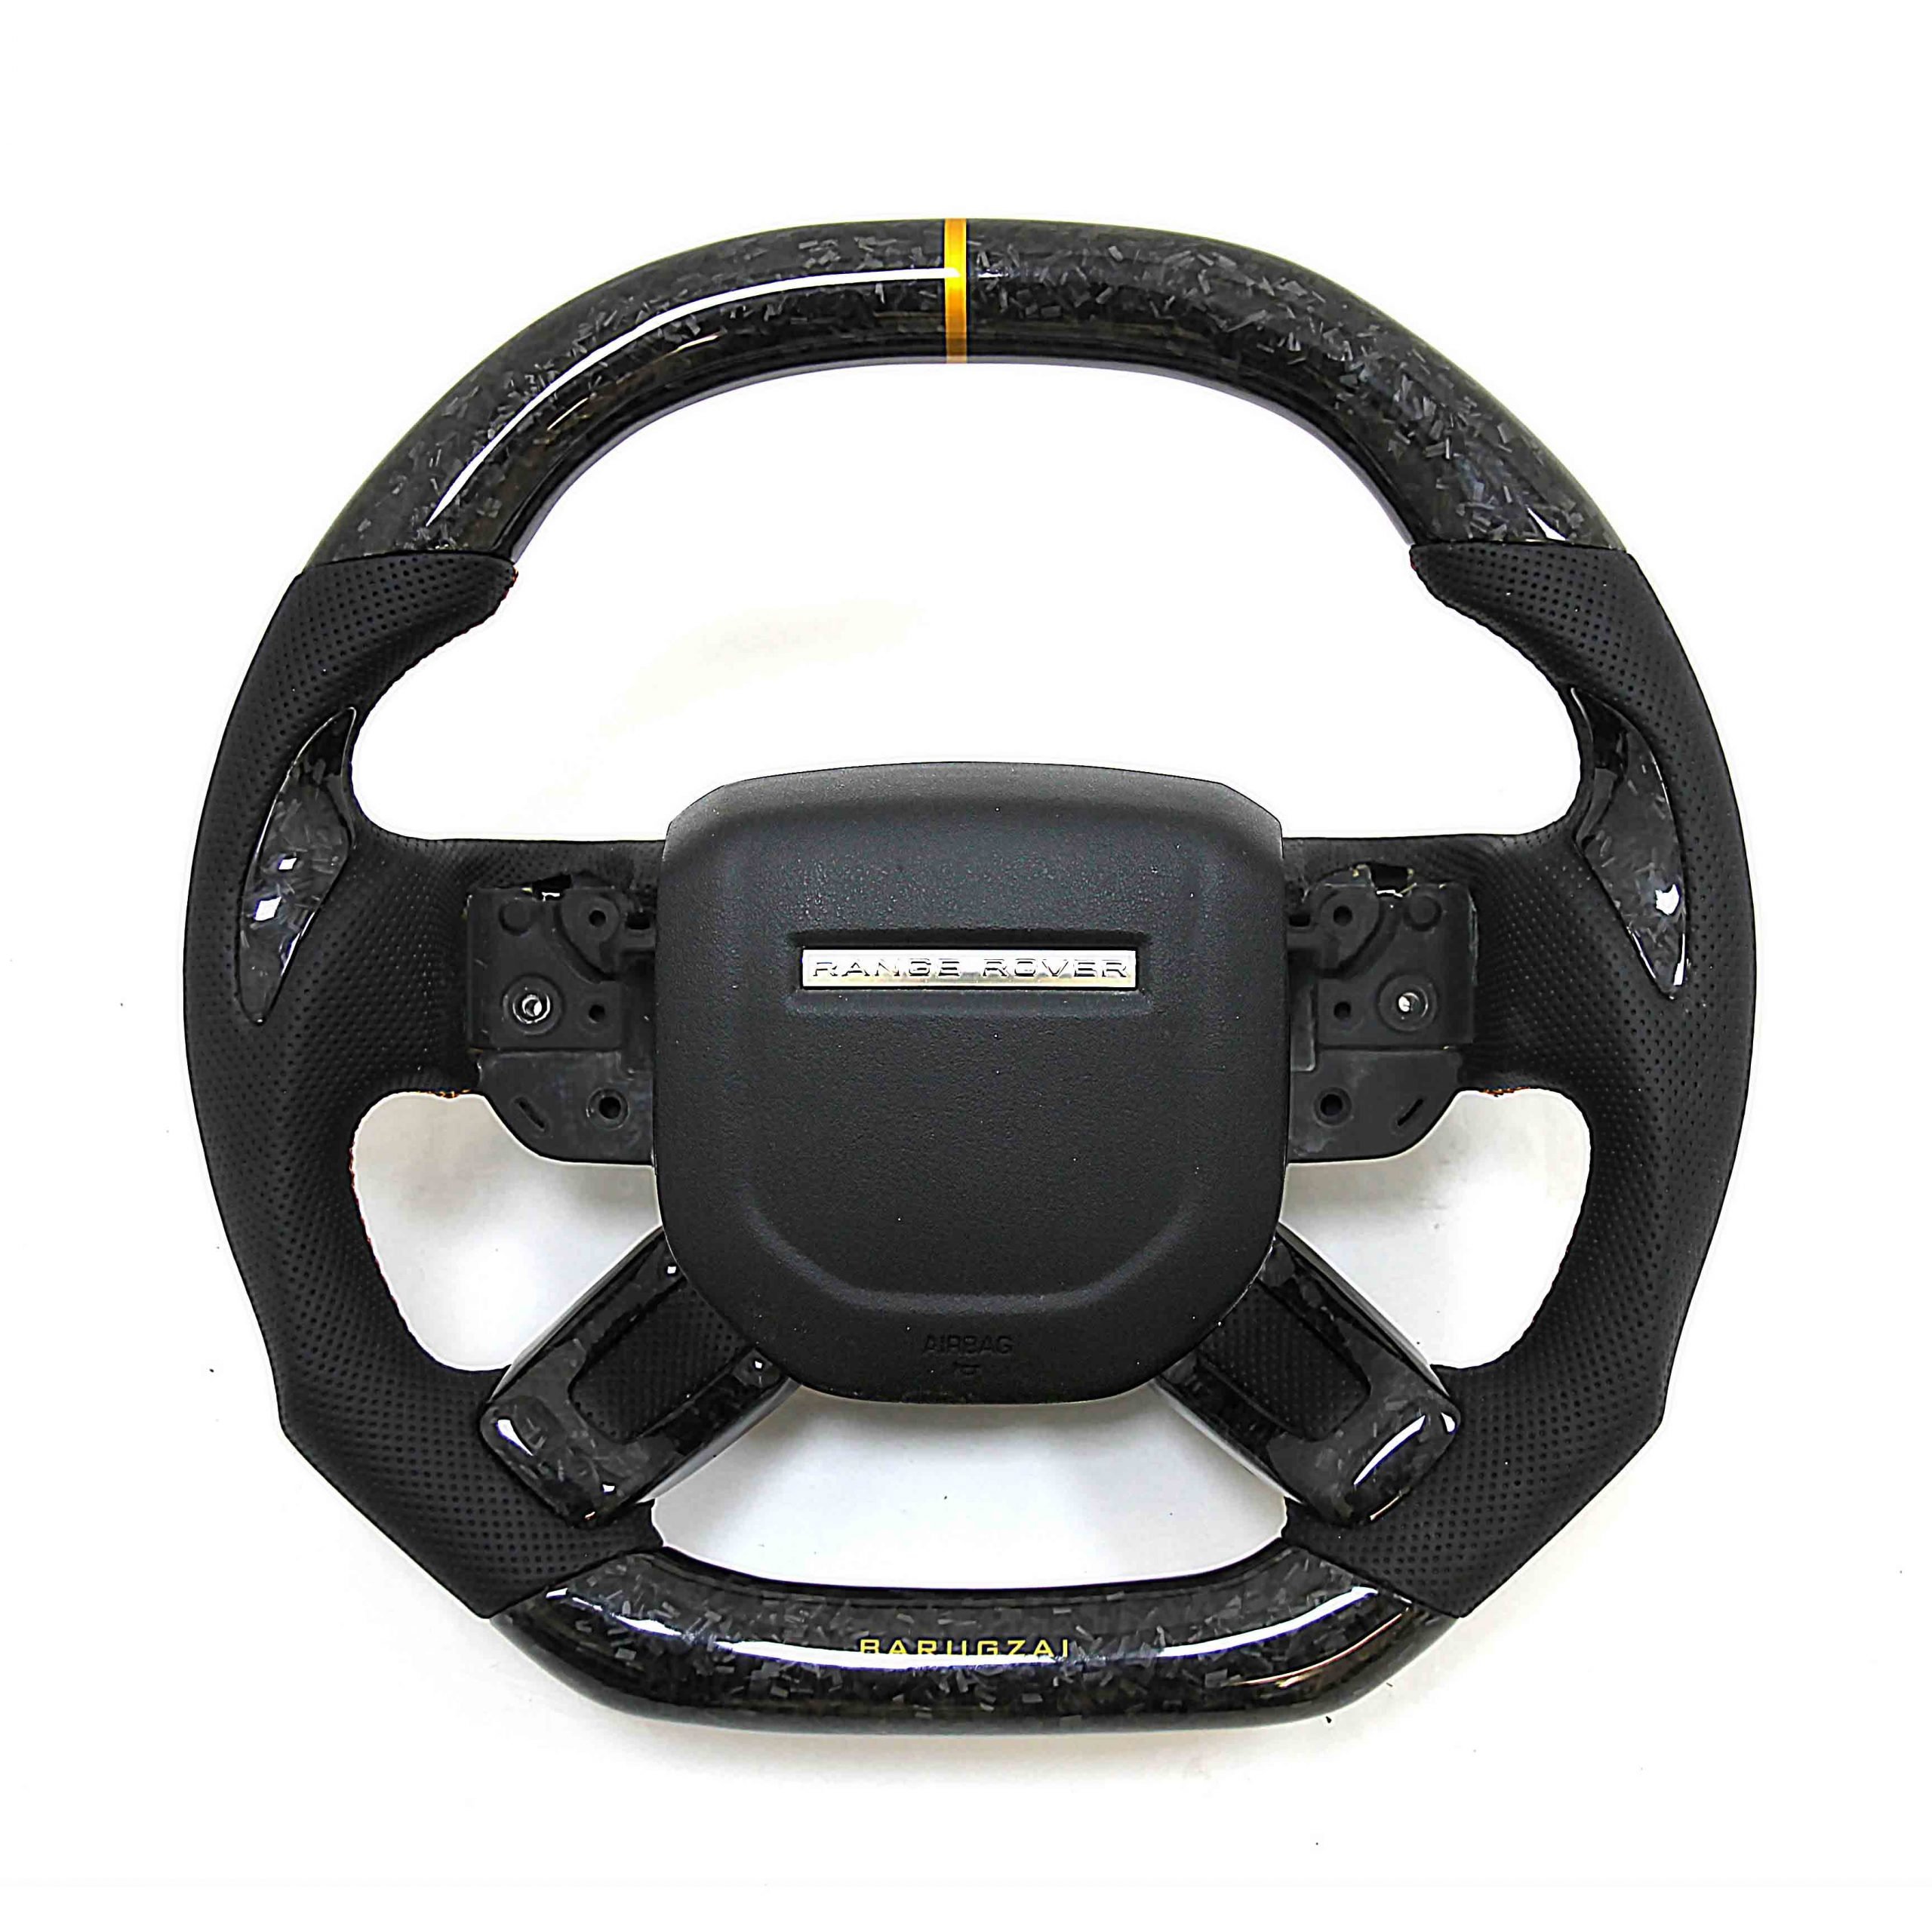 VG racing steering wheel (carbon forged) for Land Rover Range Rover Vogue (2019+)